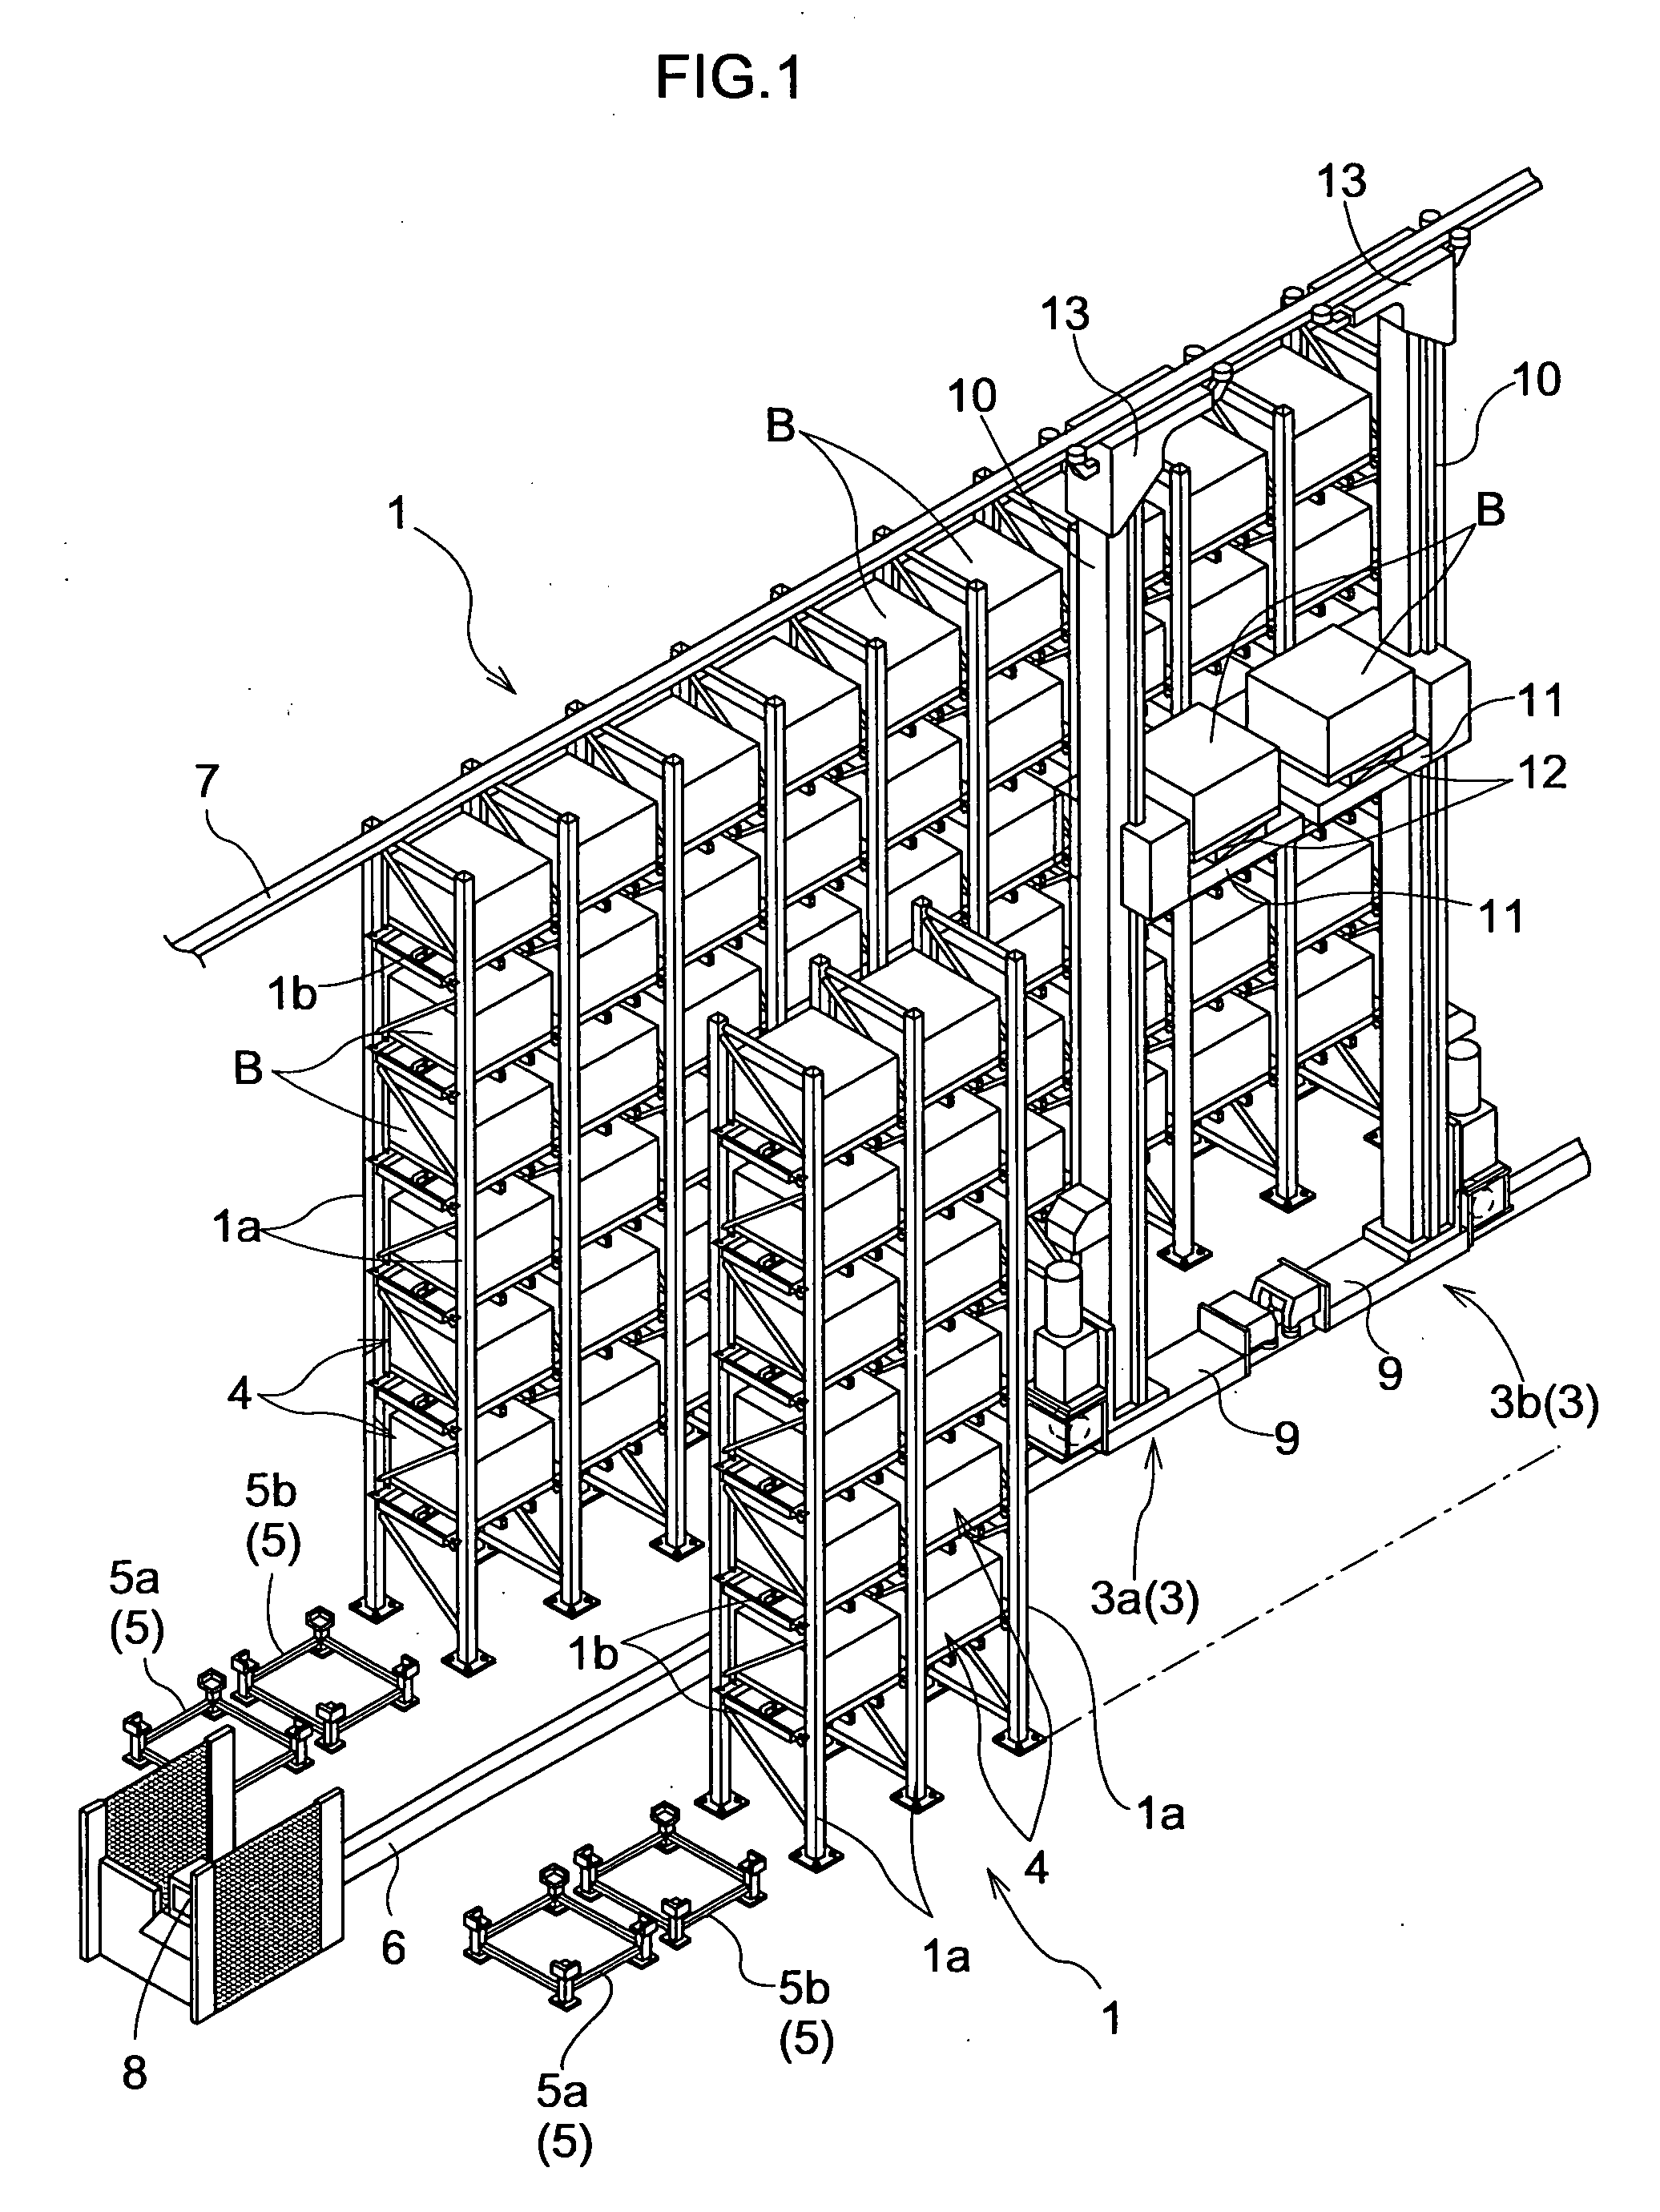 Article transport facility and a method of operating the facility